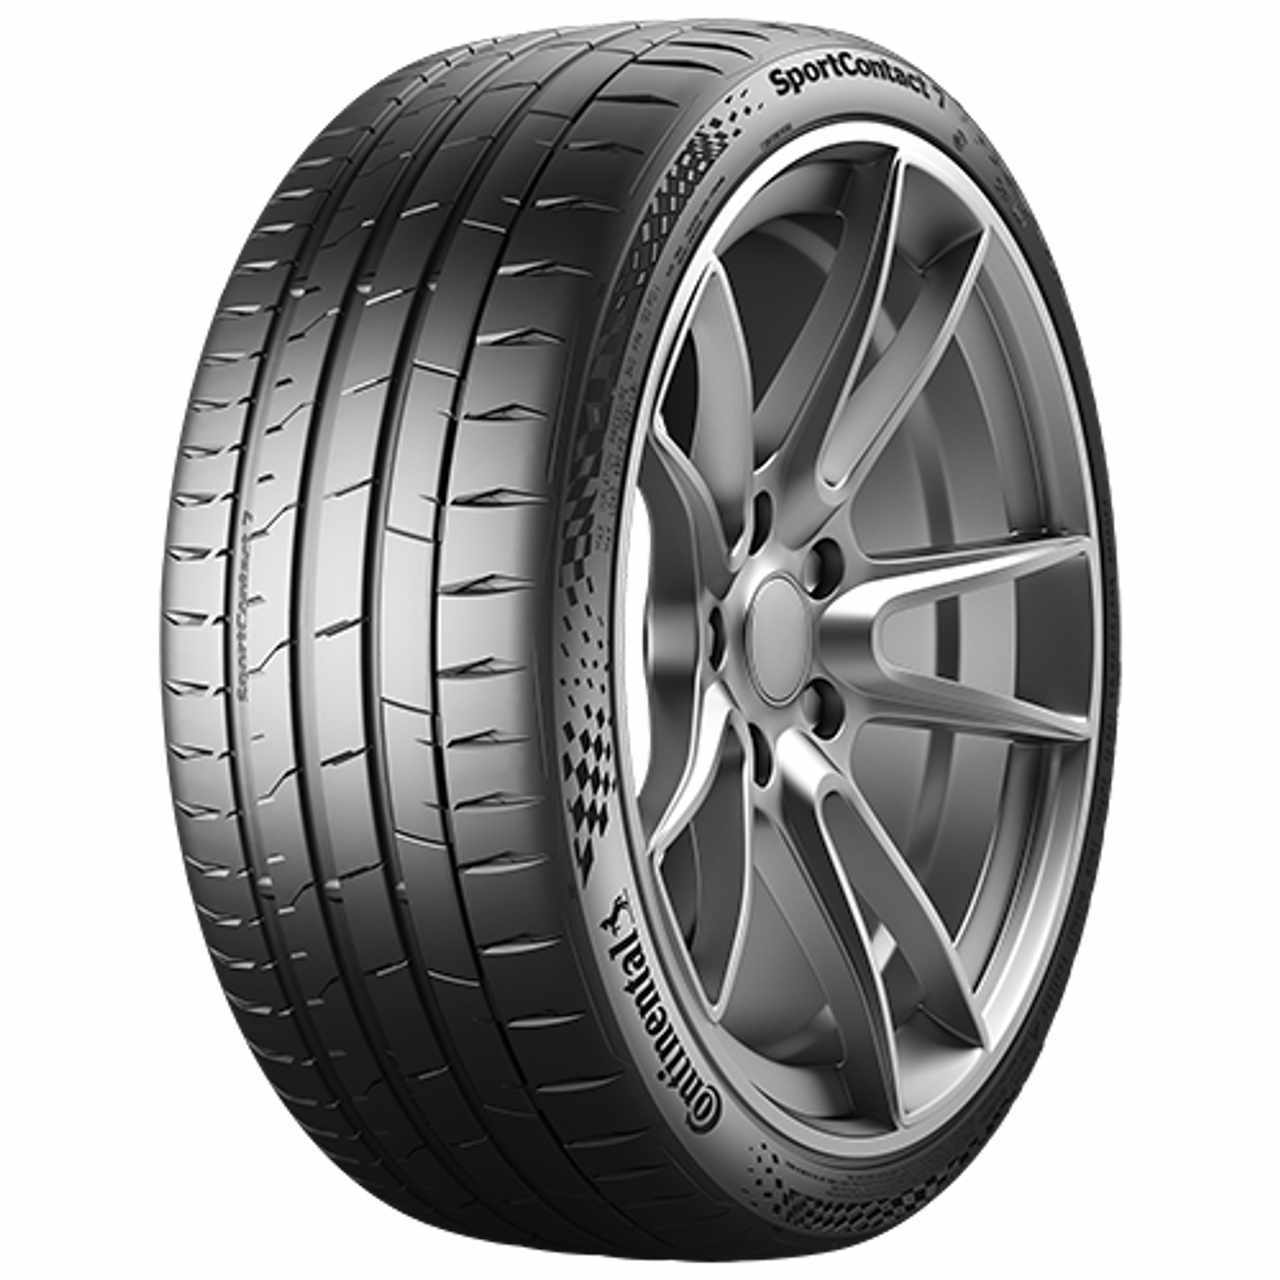 CONTINENTAL SPORTCONTACT 7 (POL) (EVc) 265/45R21 108W CONTISILENT FR BSW XL